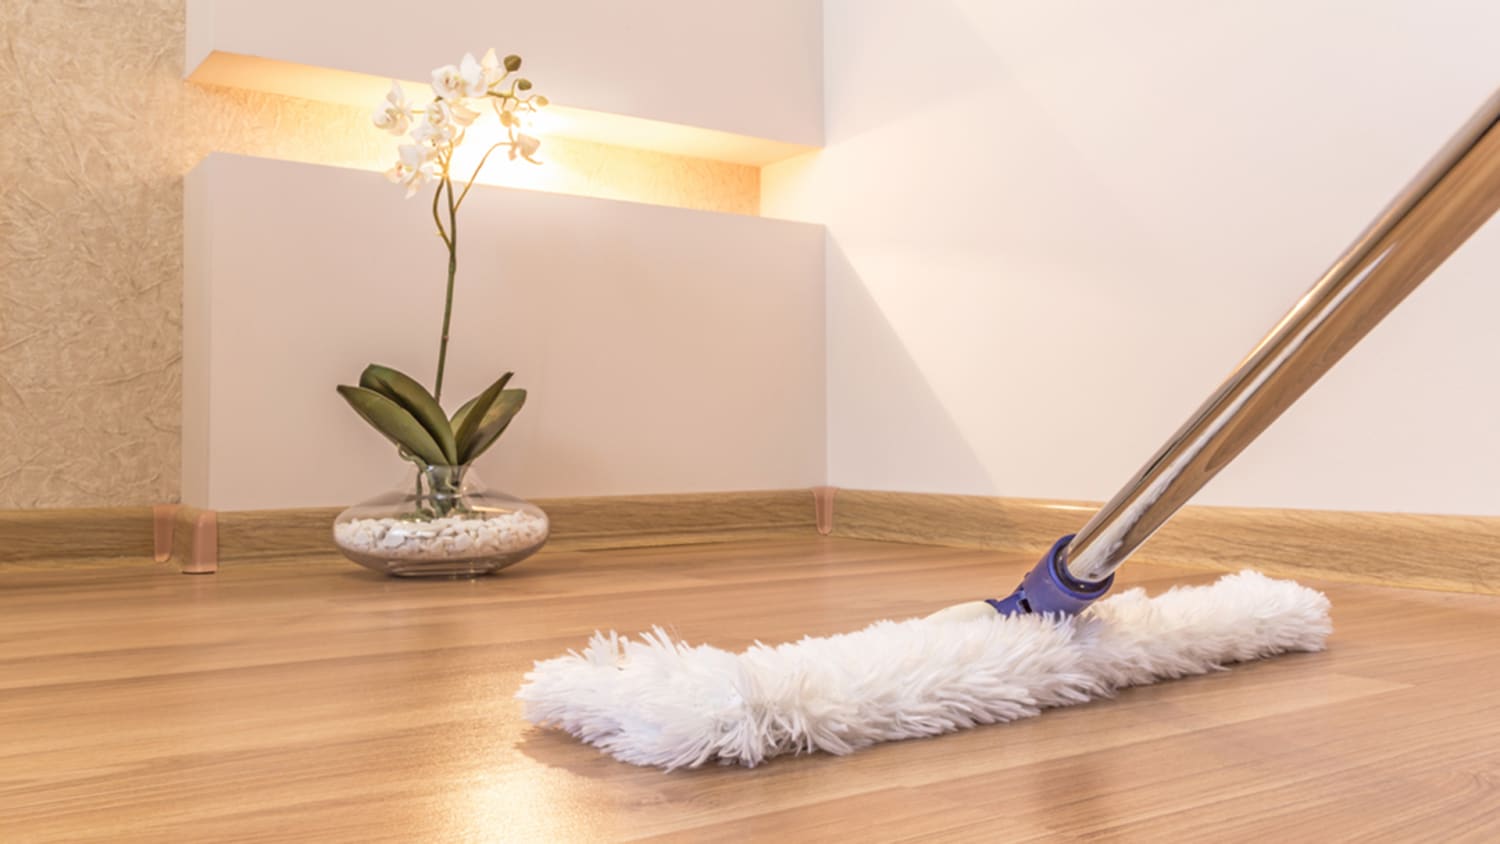 How To Clean Hardwood Floors The Right Way, How Do You Clean Hardwood Floors Without Damaging Them